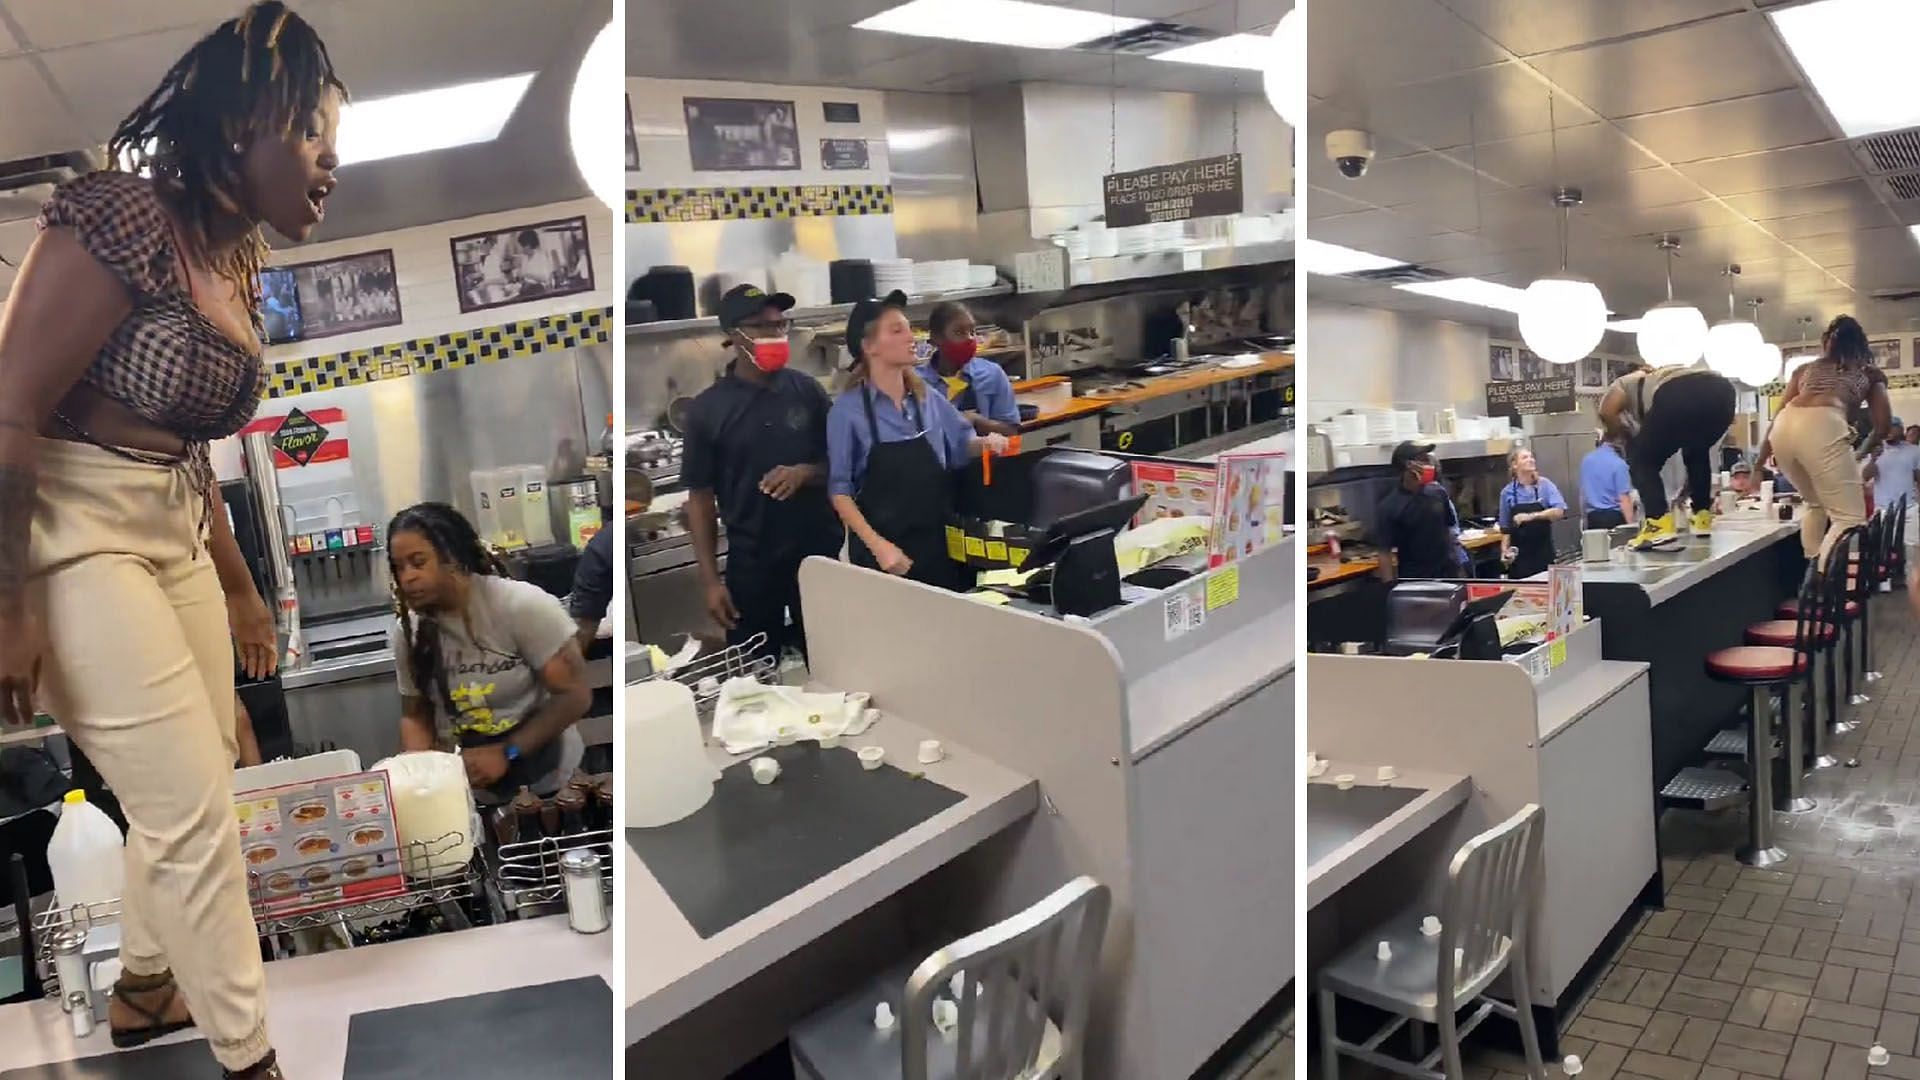 A clip showing a violent altercation at a Texas Waffle House is mistaken for a brawl in Georgia (Image via Twitter/@rbaylor_74)